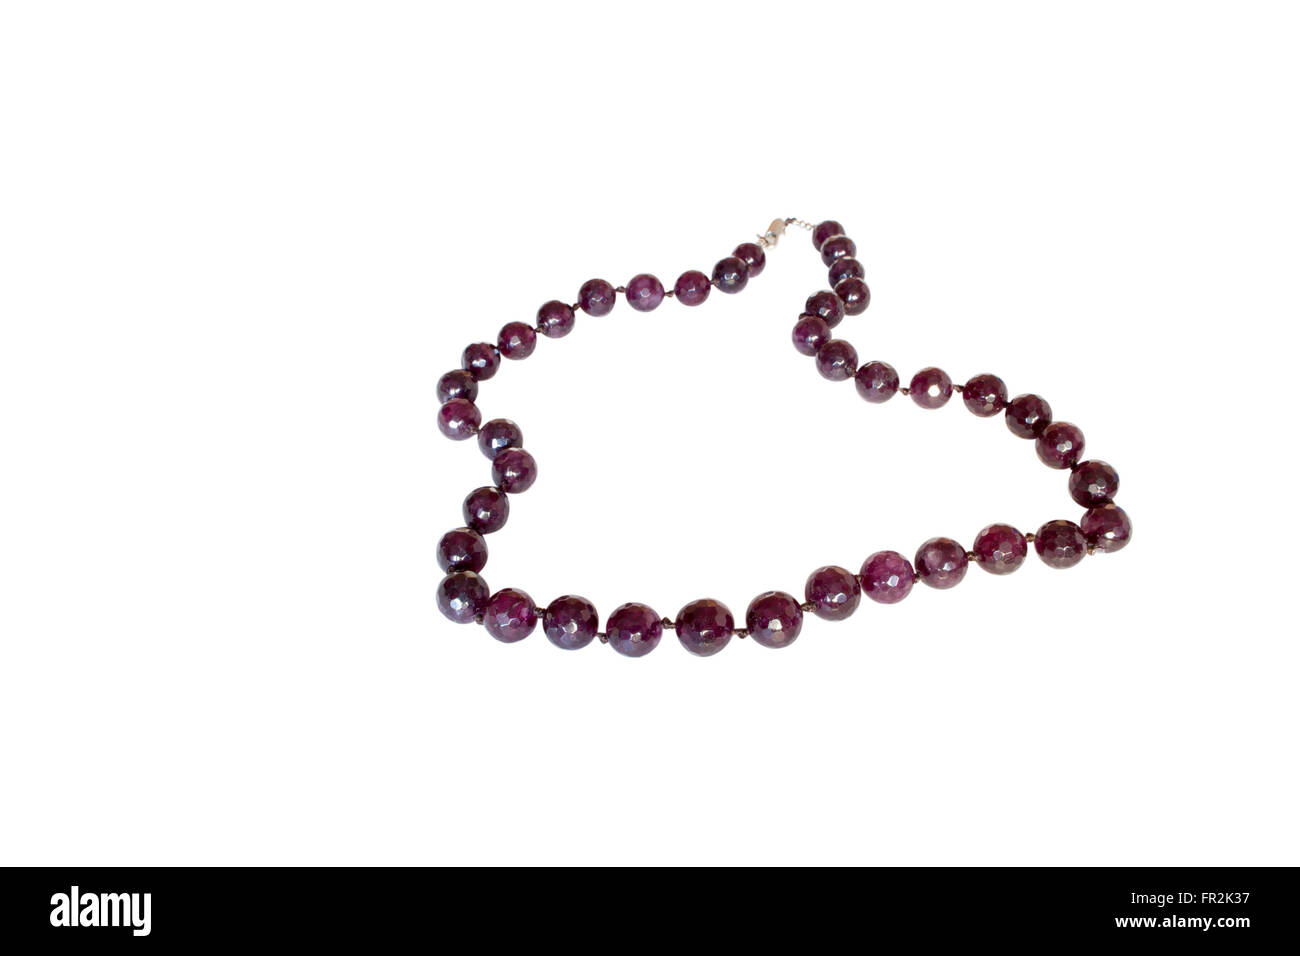 beads of amethyst.  Isolate on white background Stock Photo